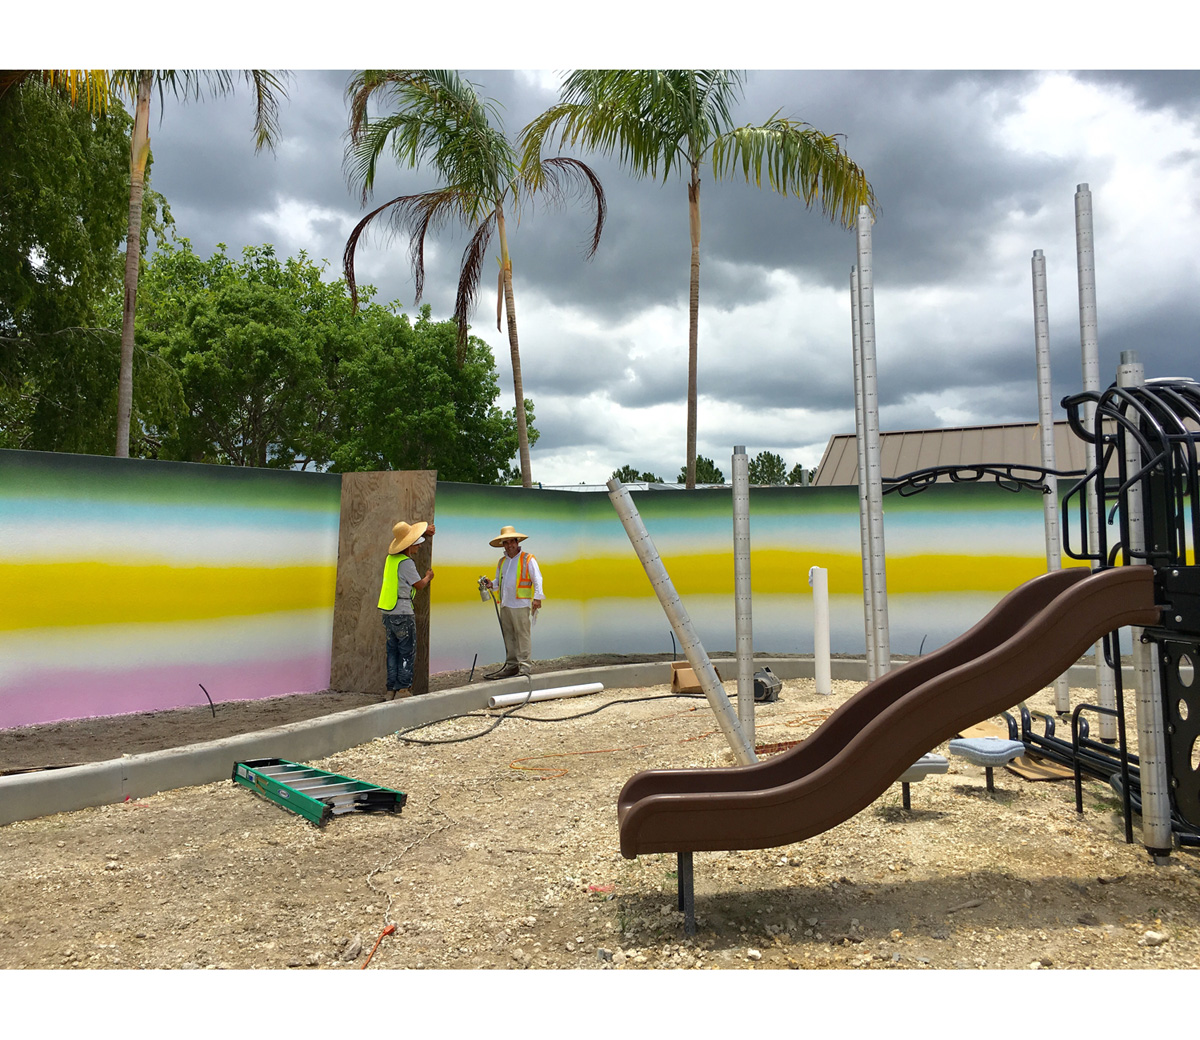   Outdoor permanent mural (detail)  2016, 43 x 2.7 m, Children’s Play Area, Miami-Dade Art in Public Places, Zoo Miami 